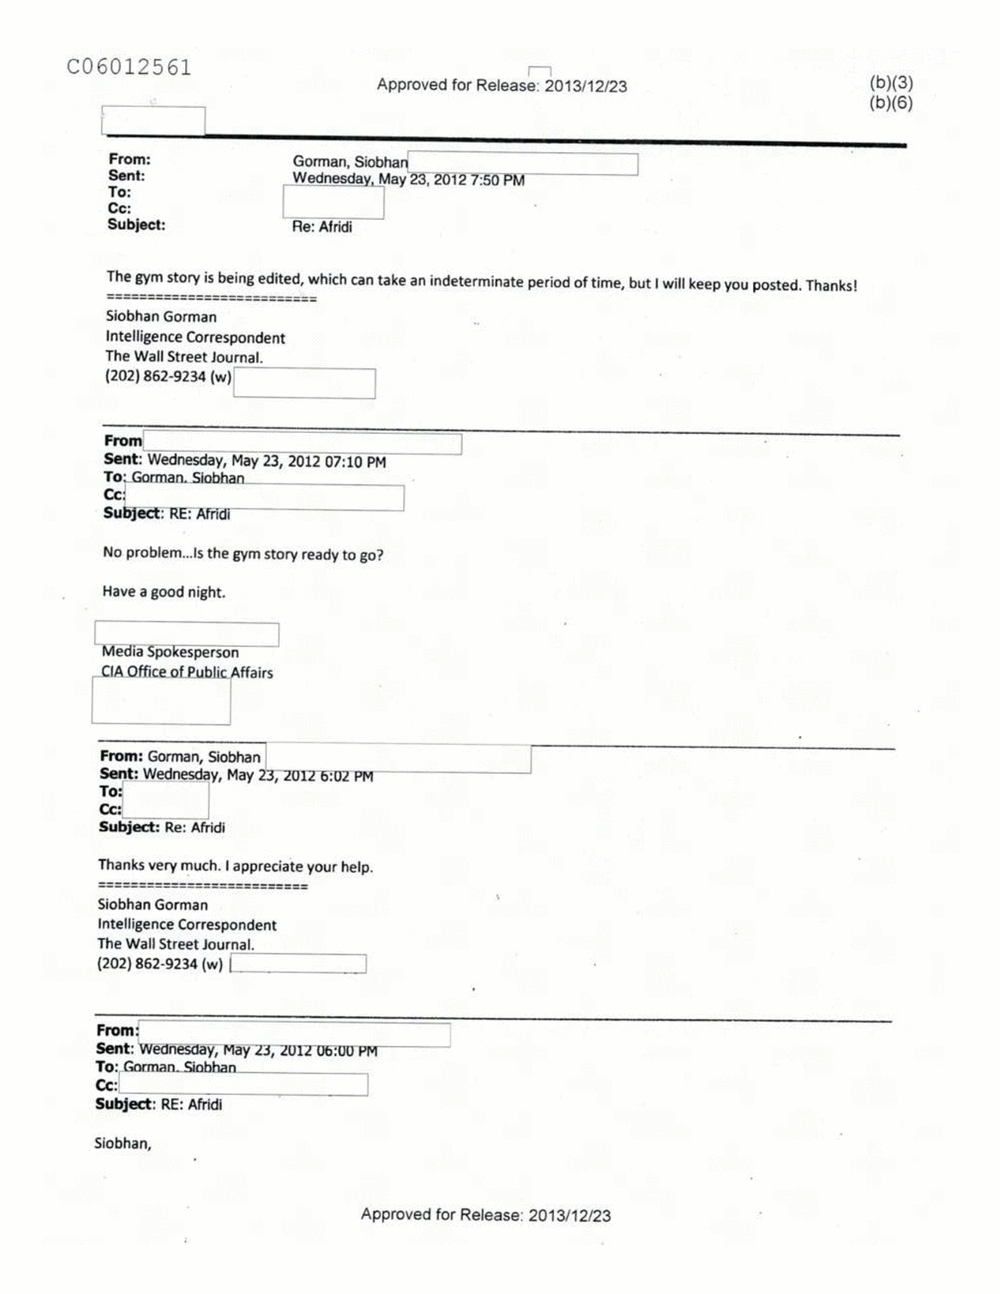 Page 94 from Email Correspondence Between Reporters and CIA Flacks